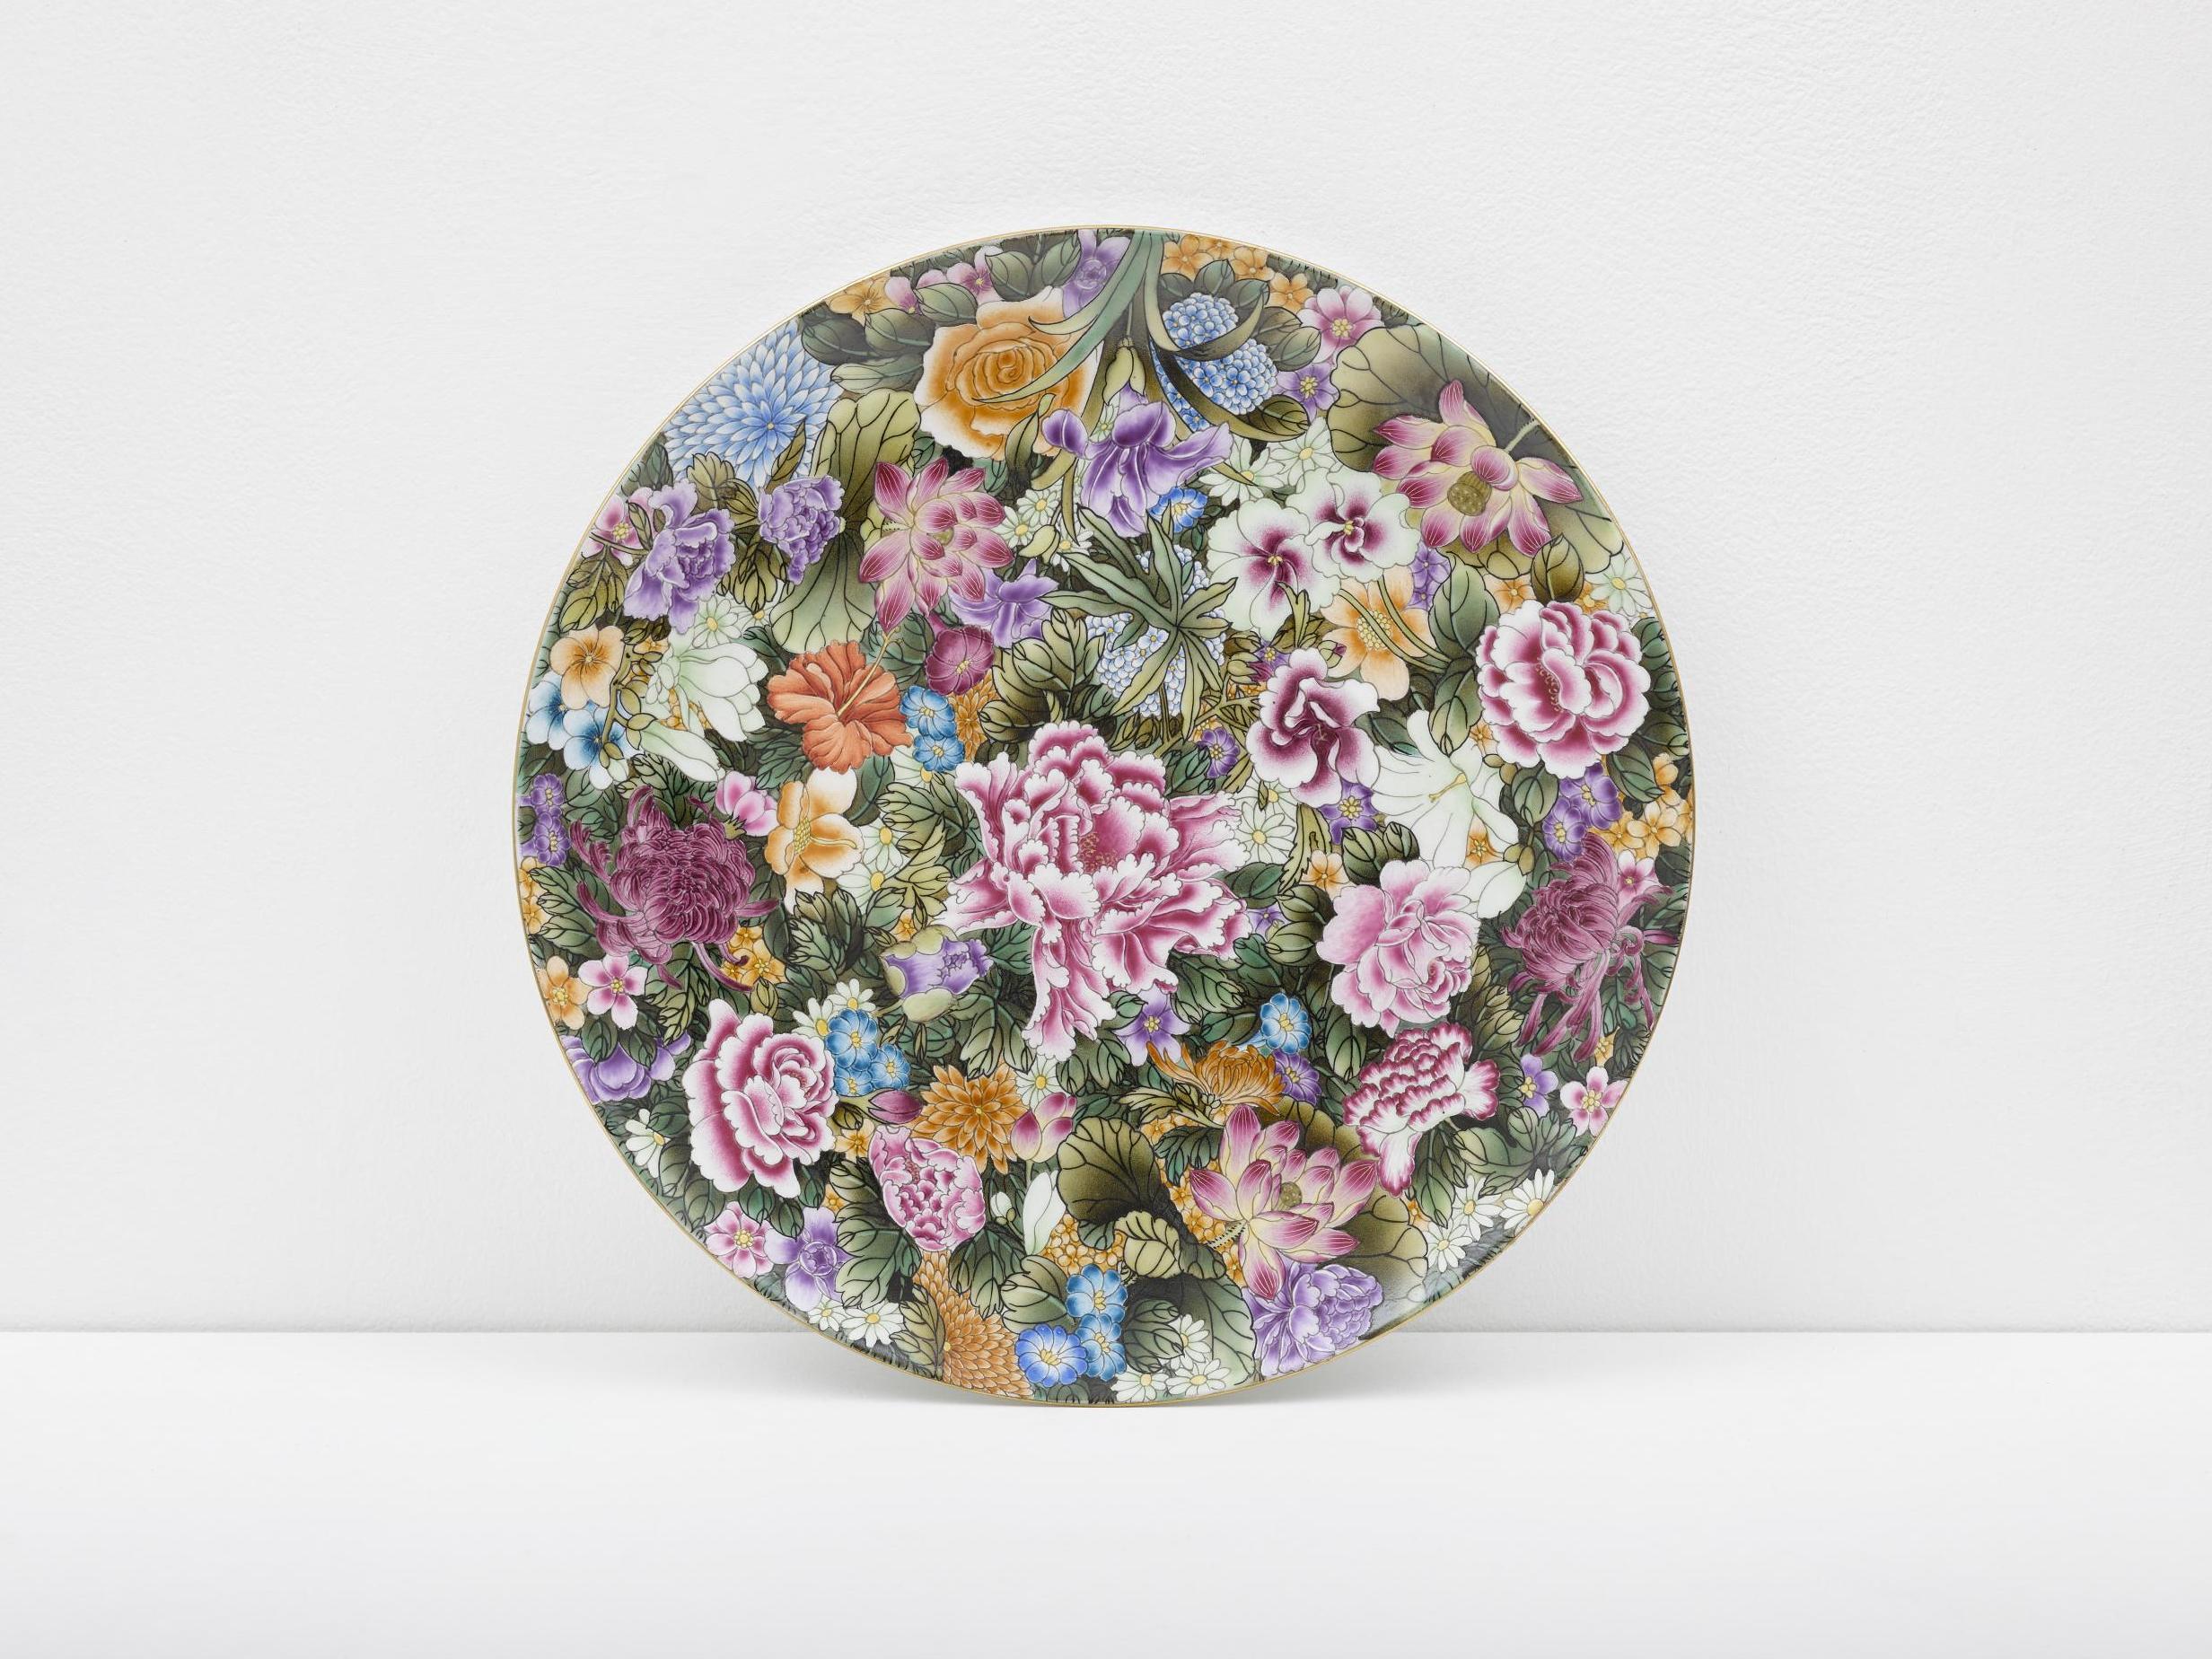 Auction: Ai Weiwei’s Small Plate with Flowers, 2014, is among lots including works by Bridget Riley and Yinka Shonibare